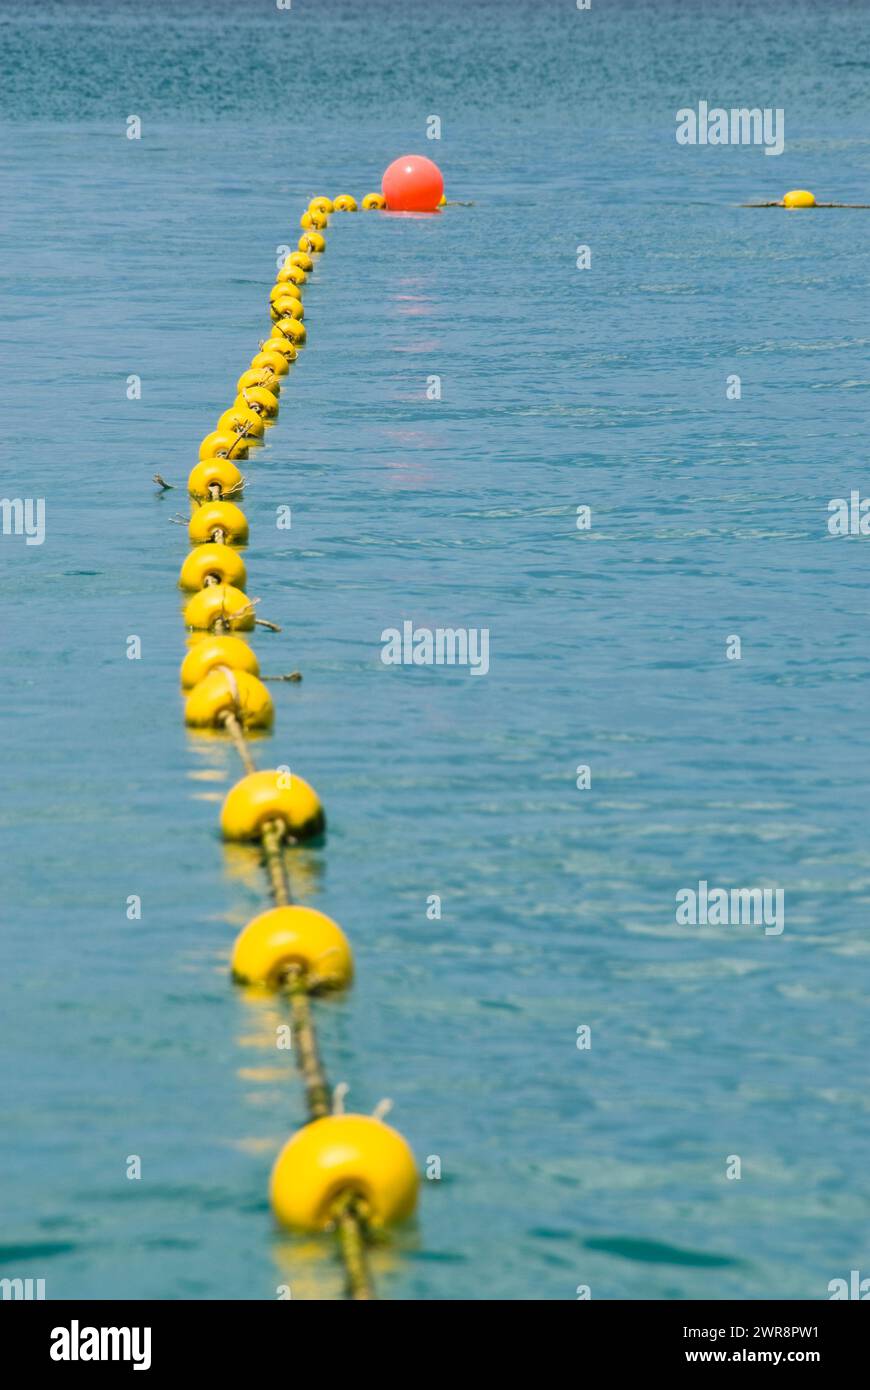 A line of buoys floating near a single buoy in the water Stock Photo